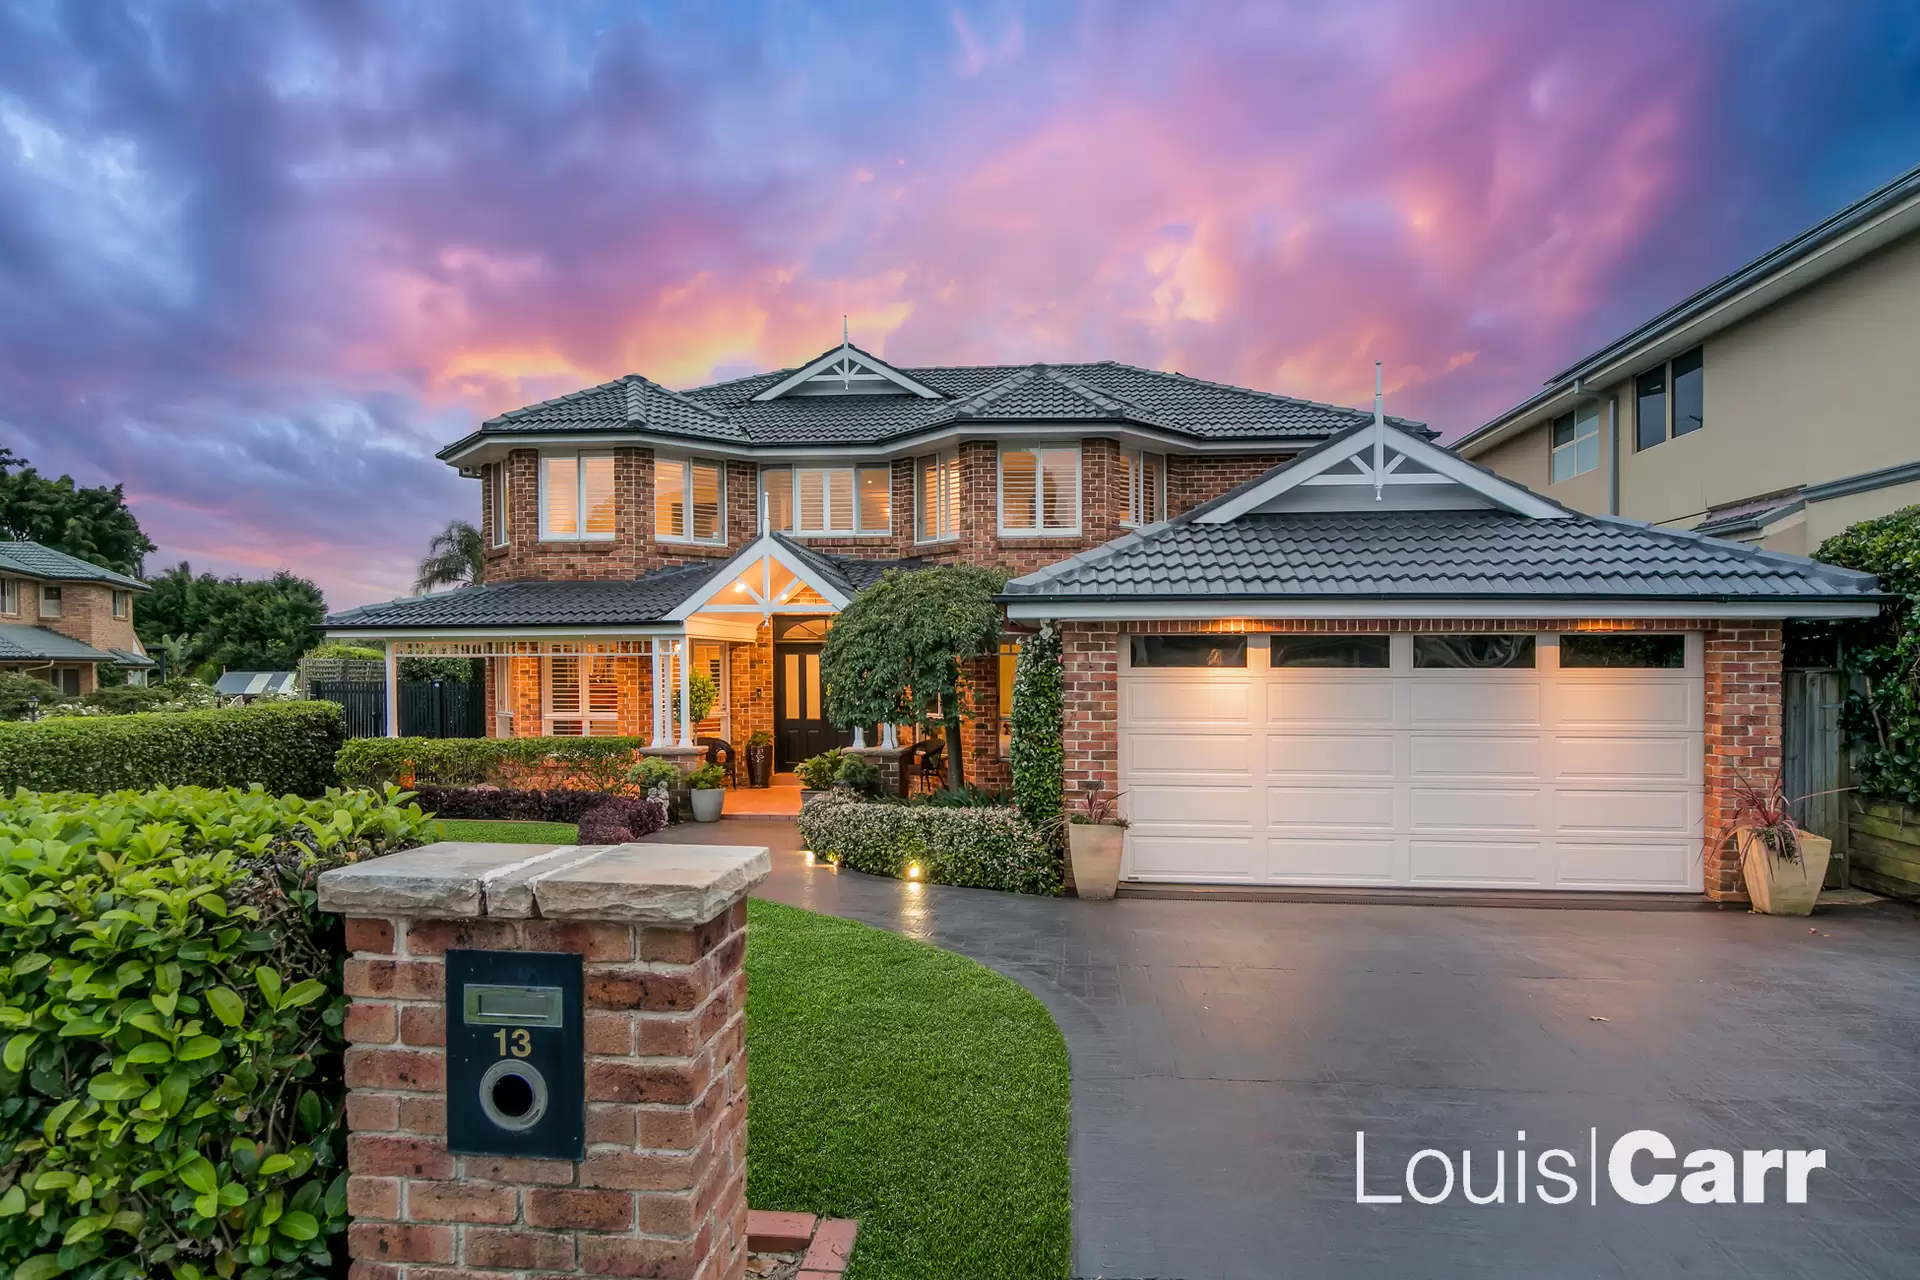 Photo #1: 13 Merelynne Avenue, West Pennant Hills - Sold by Louis Carr Real Estate